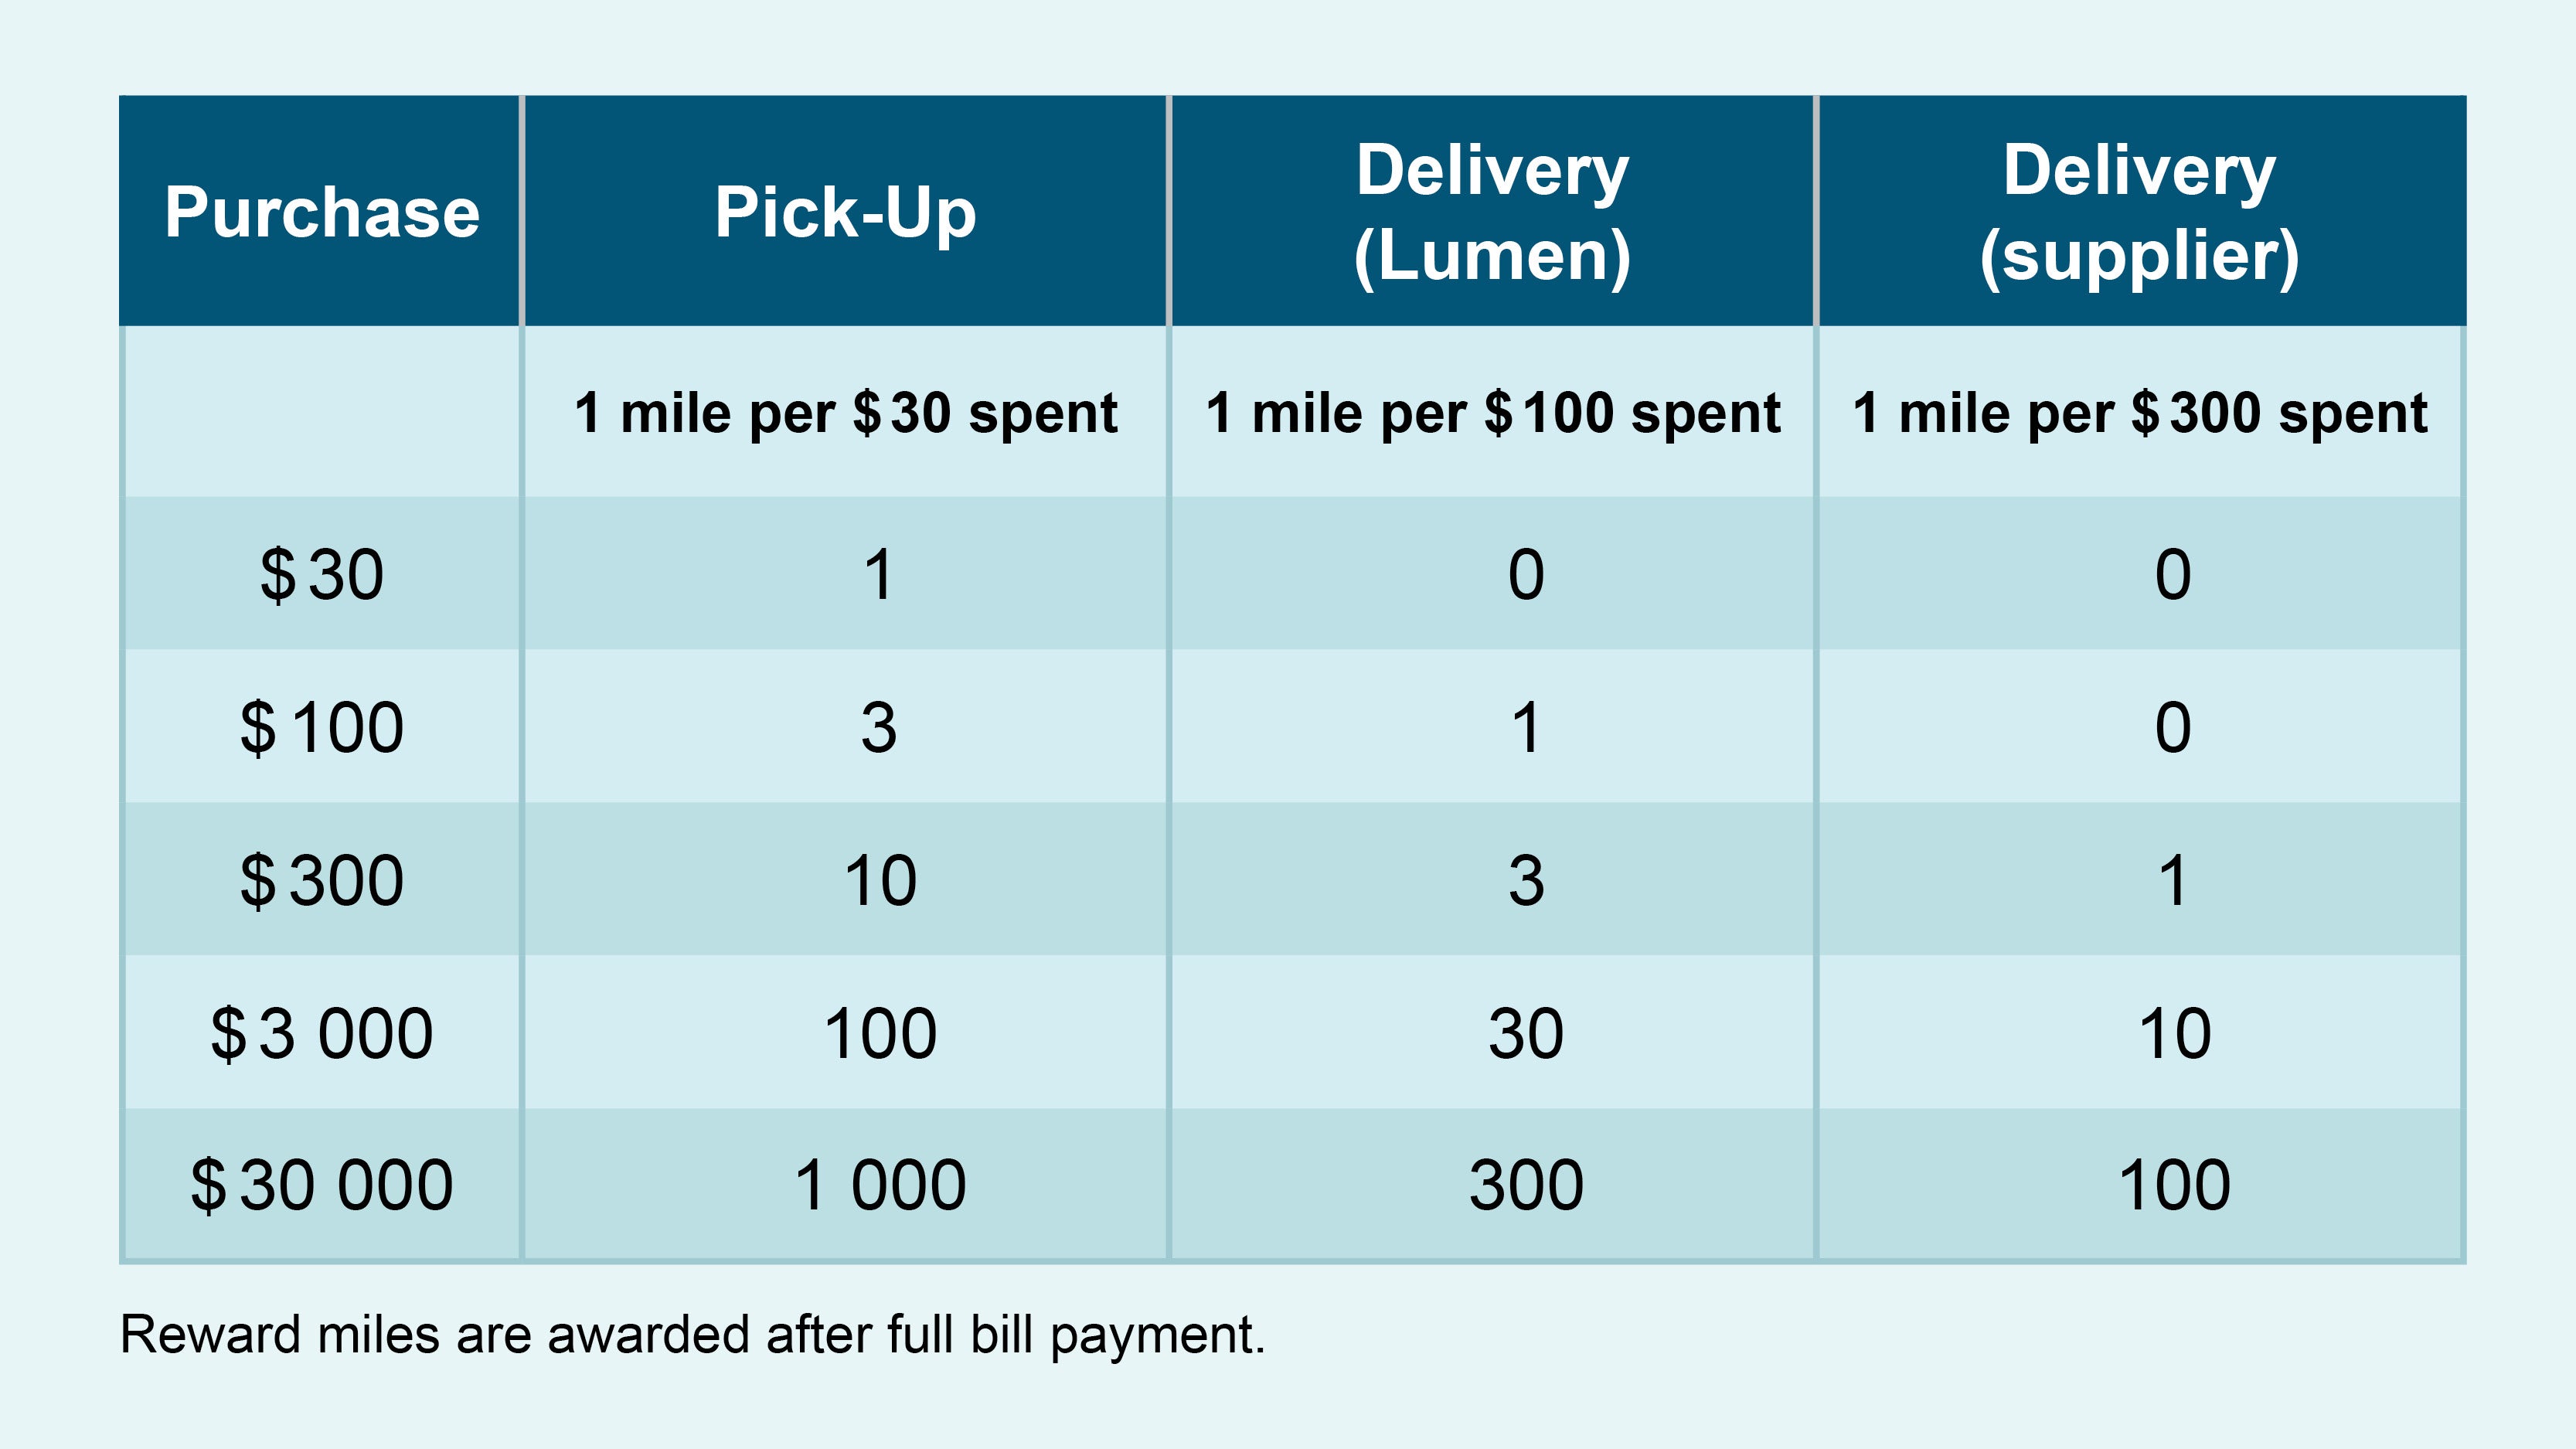 Get up to 10 times the AIR MILES reward miles